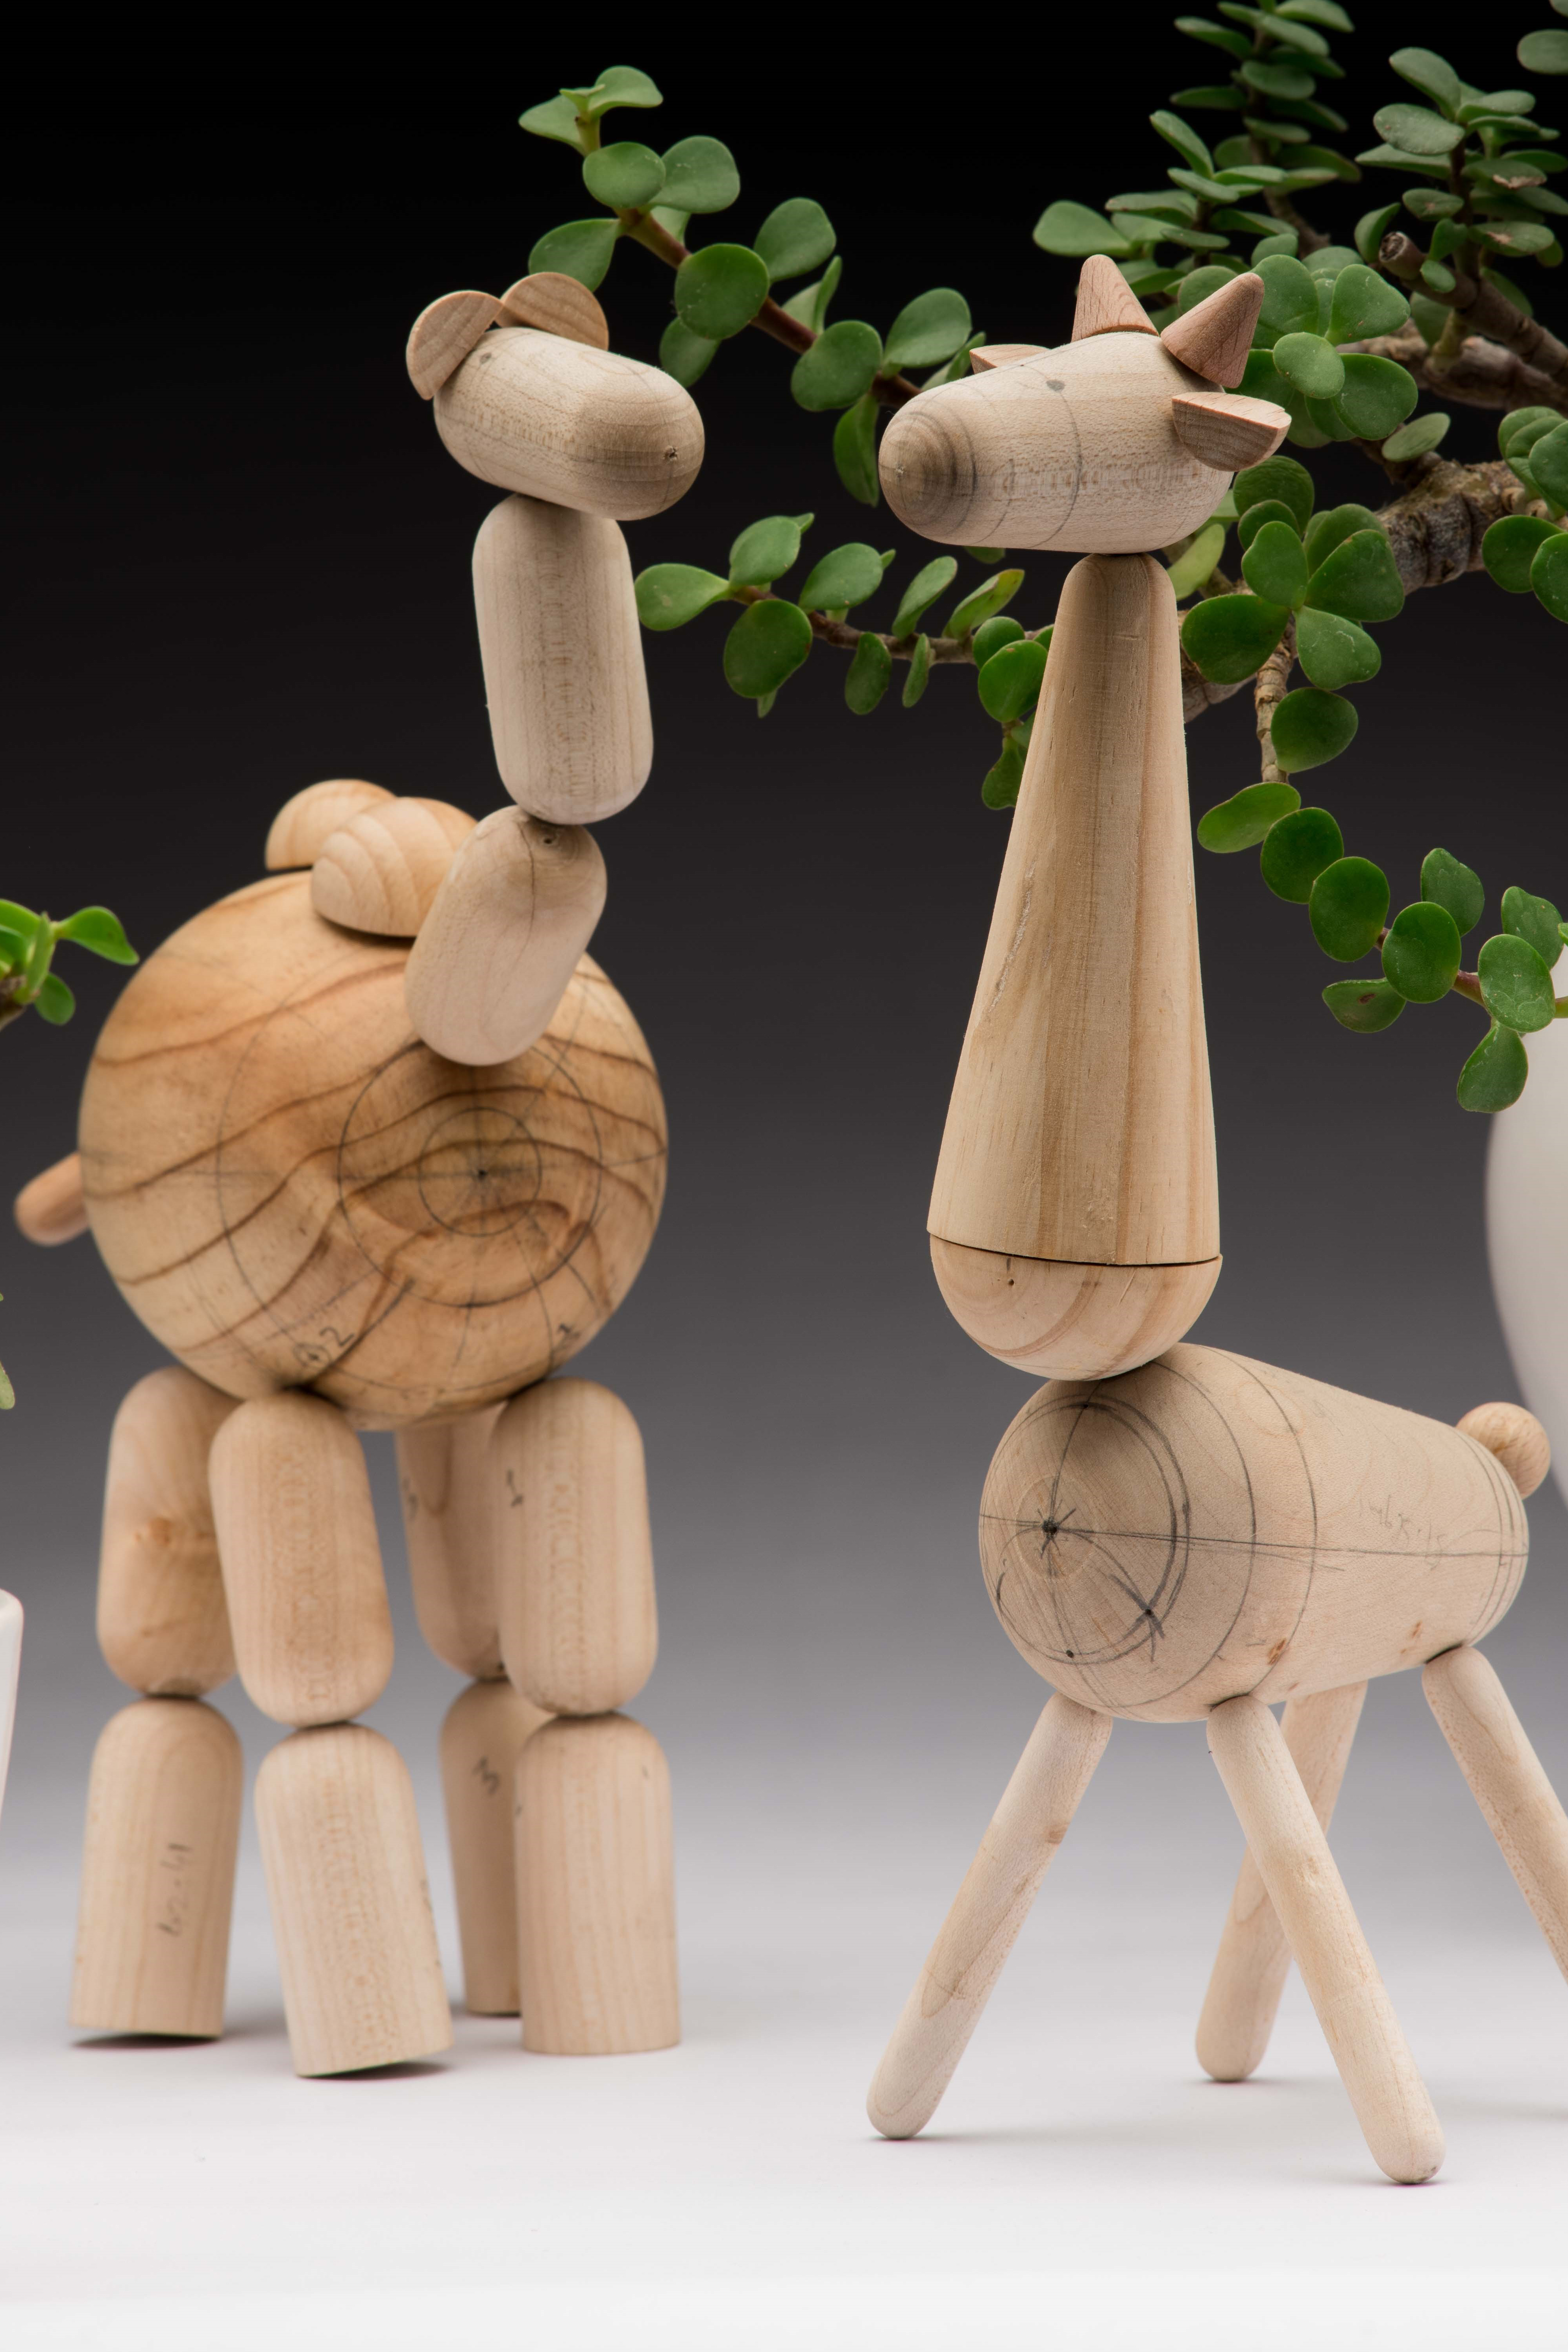 Shikhar: The magnetically modular wooden animals can be put together intuitively and are mainly handmade, made from sorted wood waste.